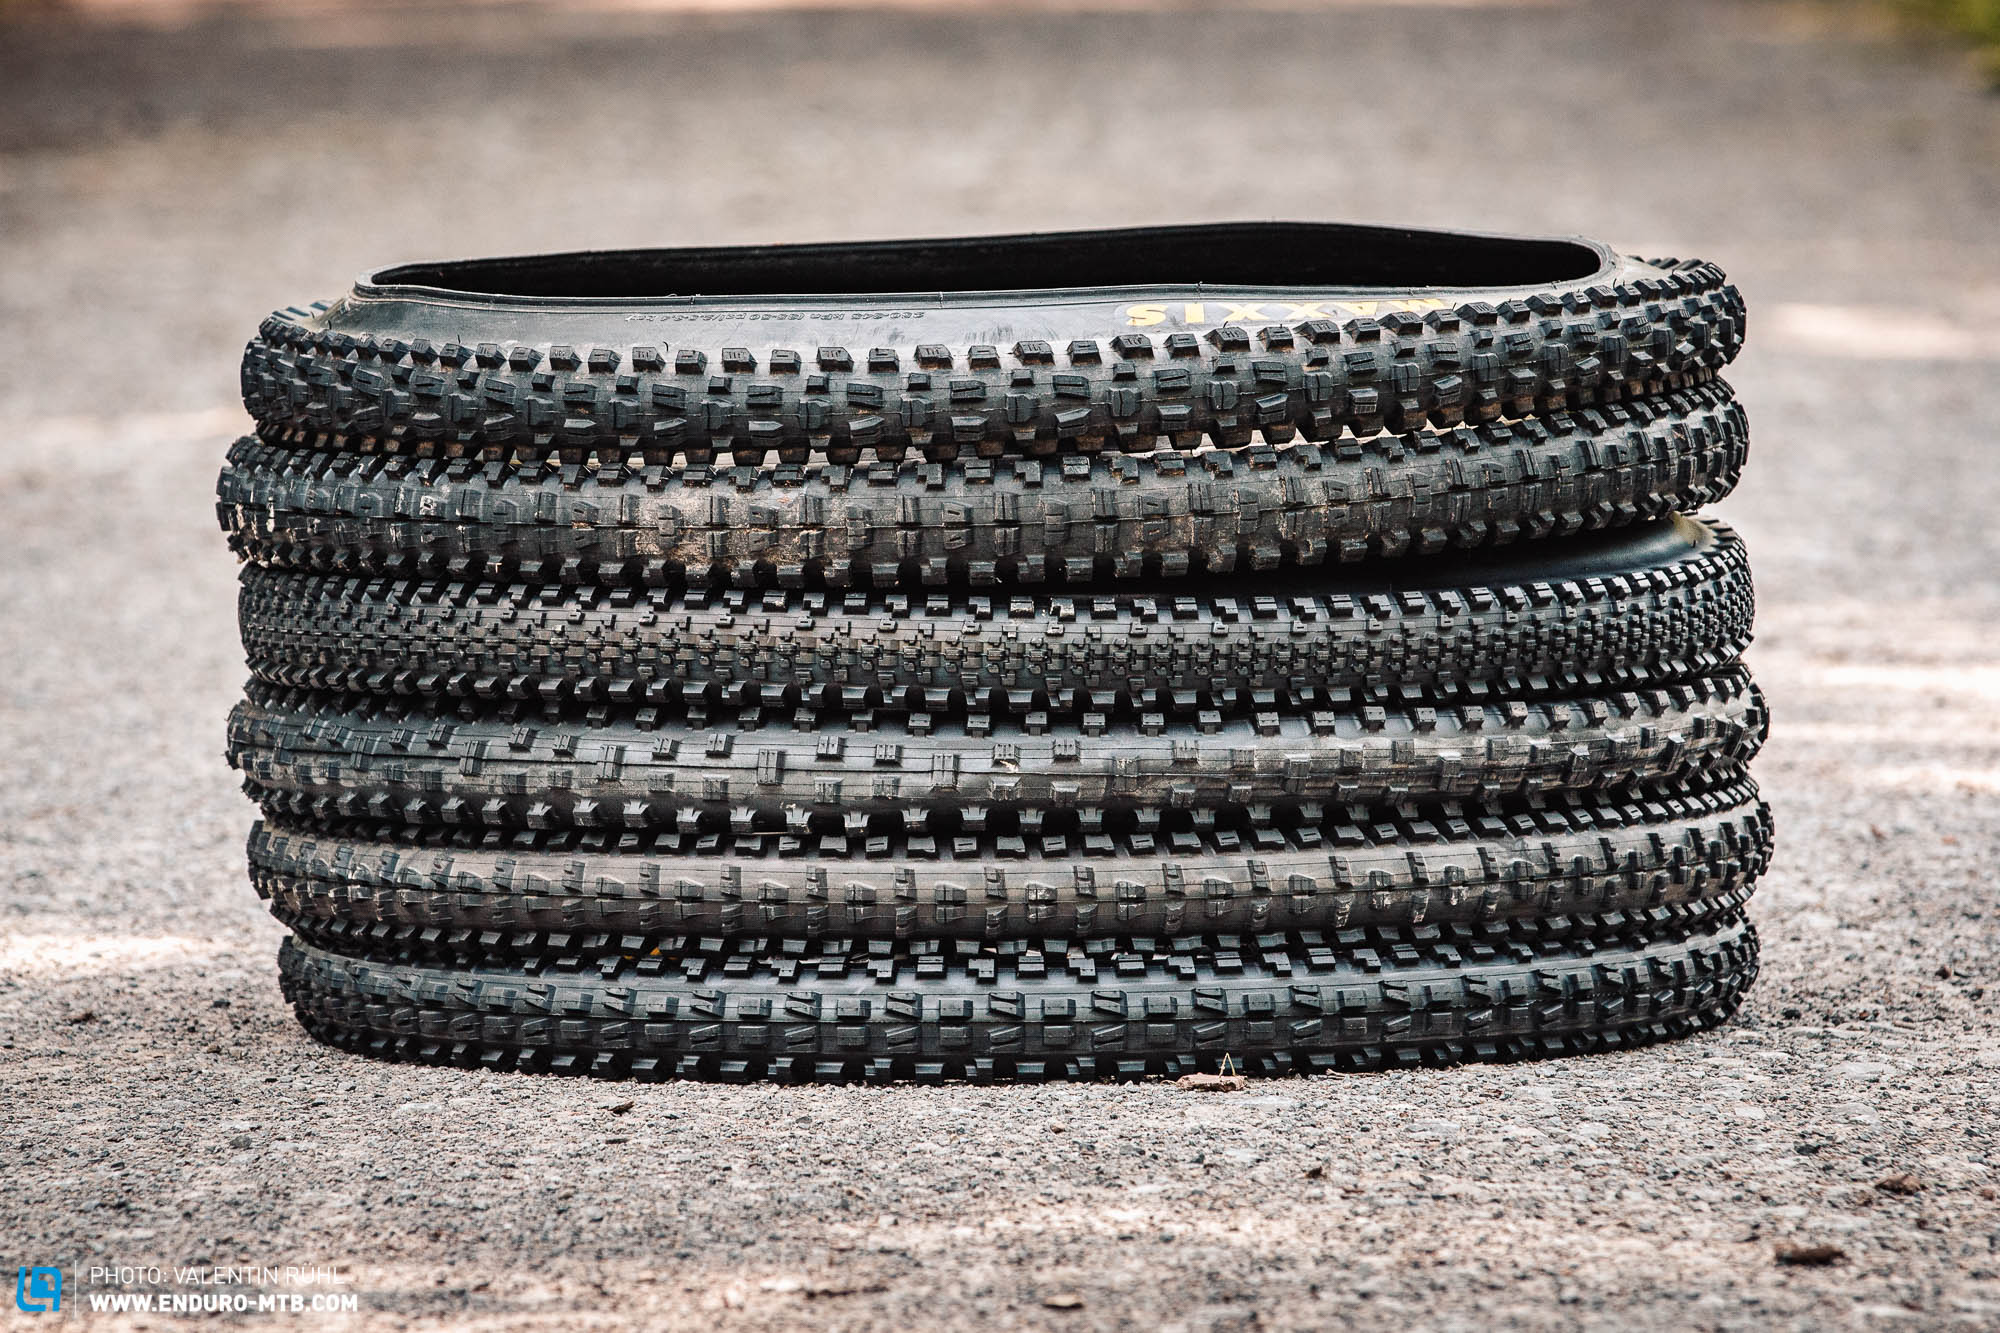 MAXXIS update EXO+ tires – New EXO+ with improved puncture resistance